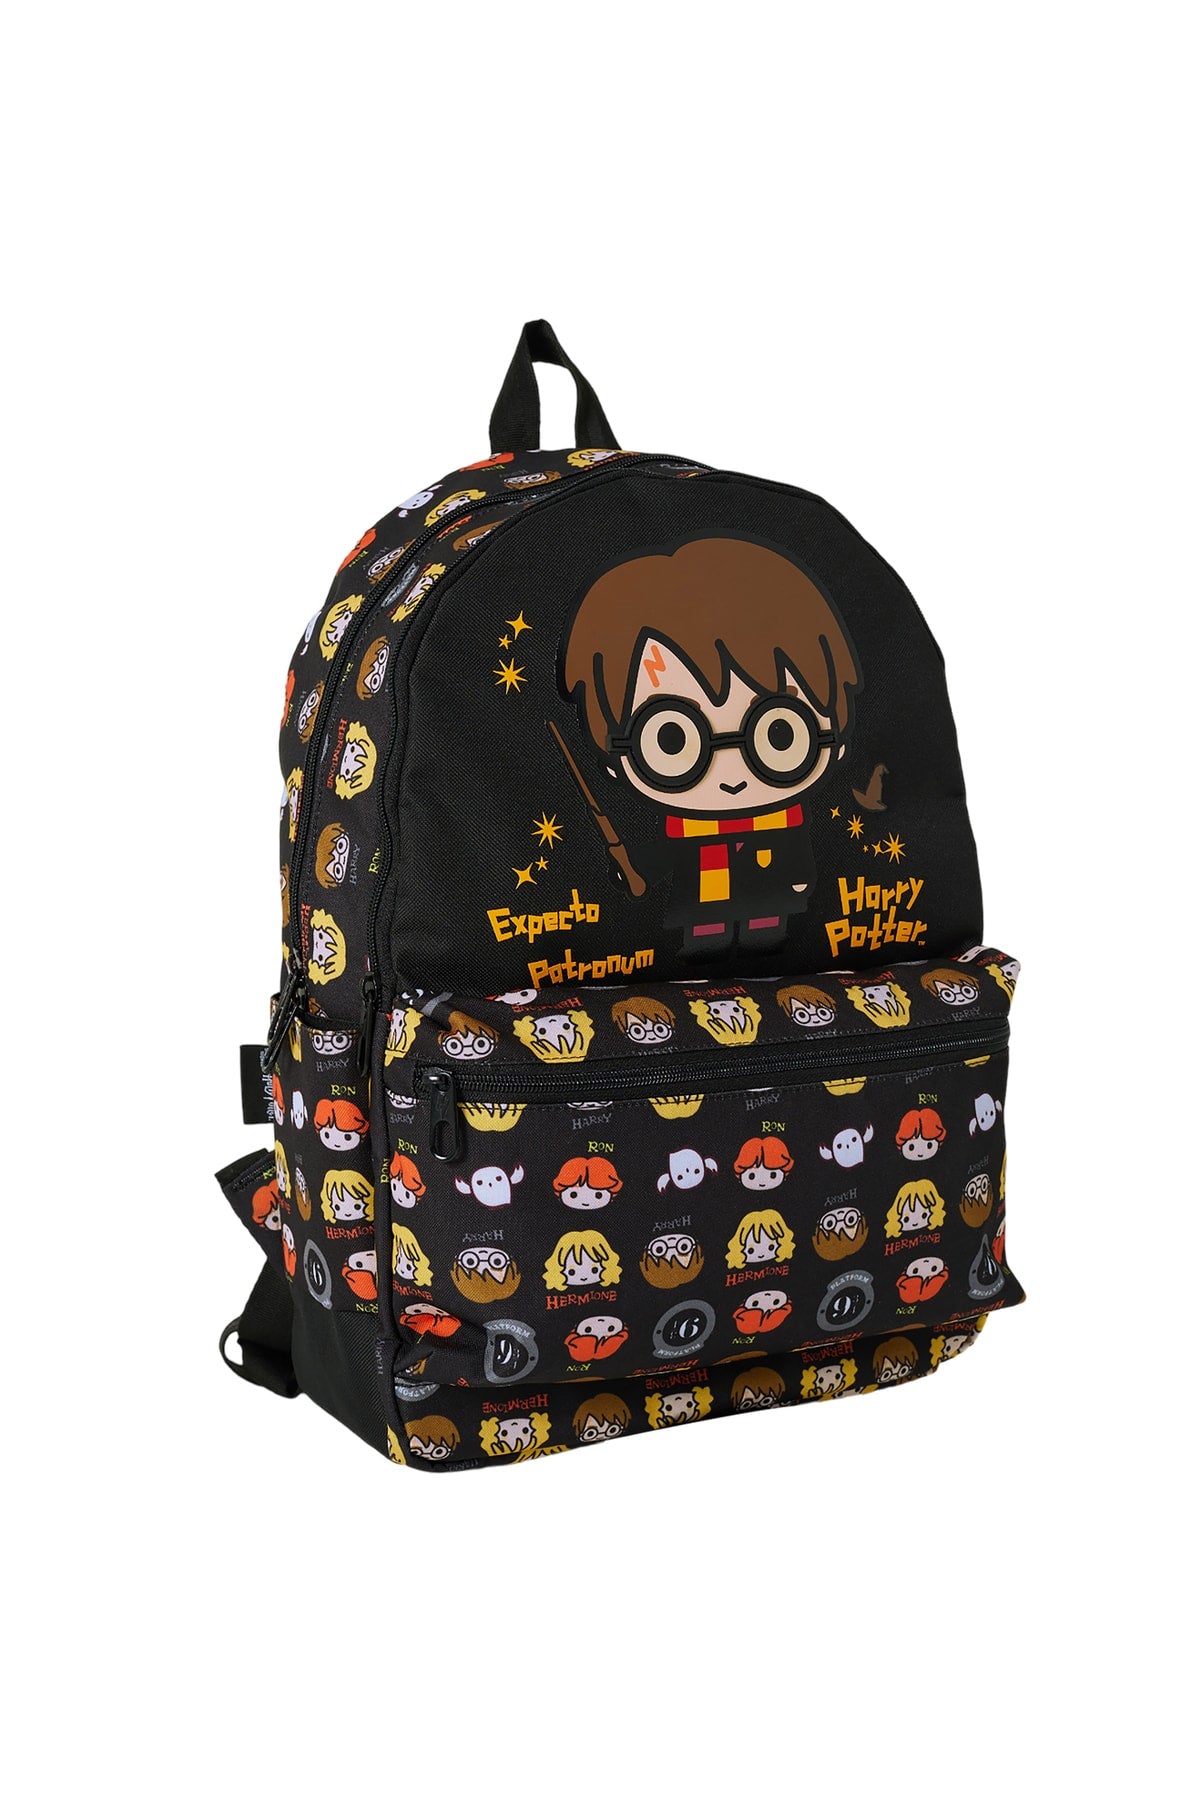 -Harry Potter Primary And Secondary School Bag-Nutrition And Pencil Bag Set